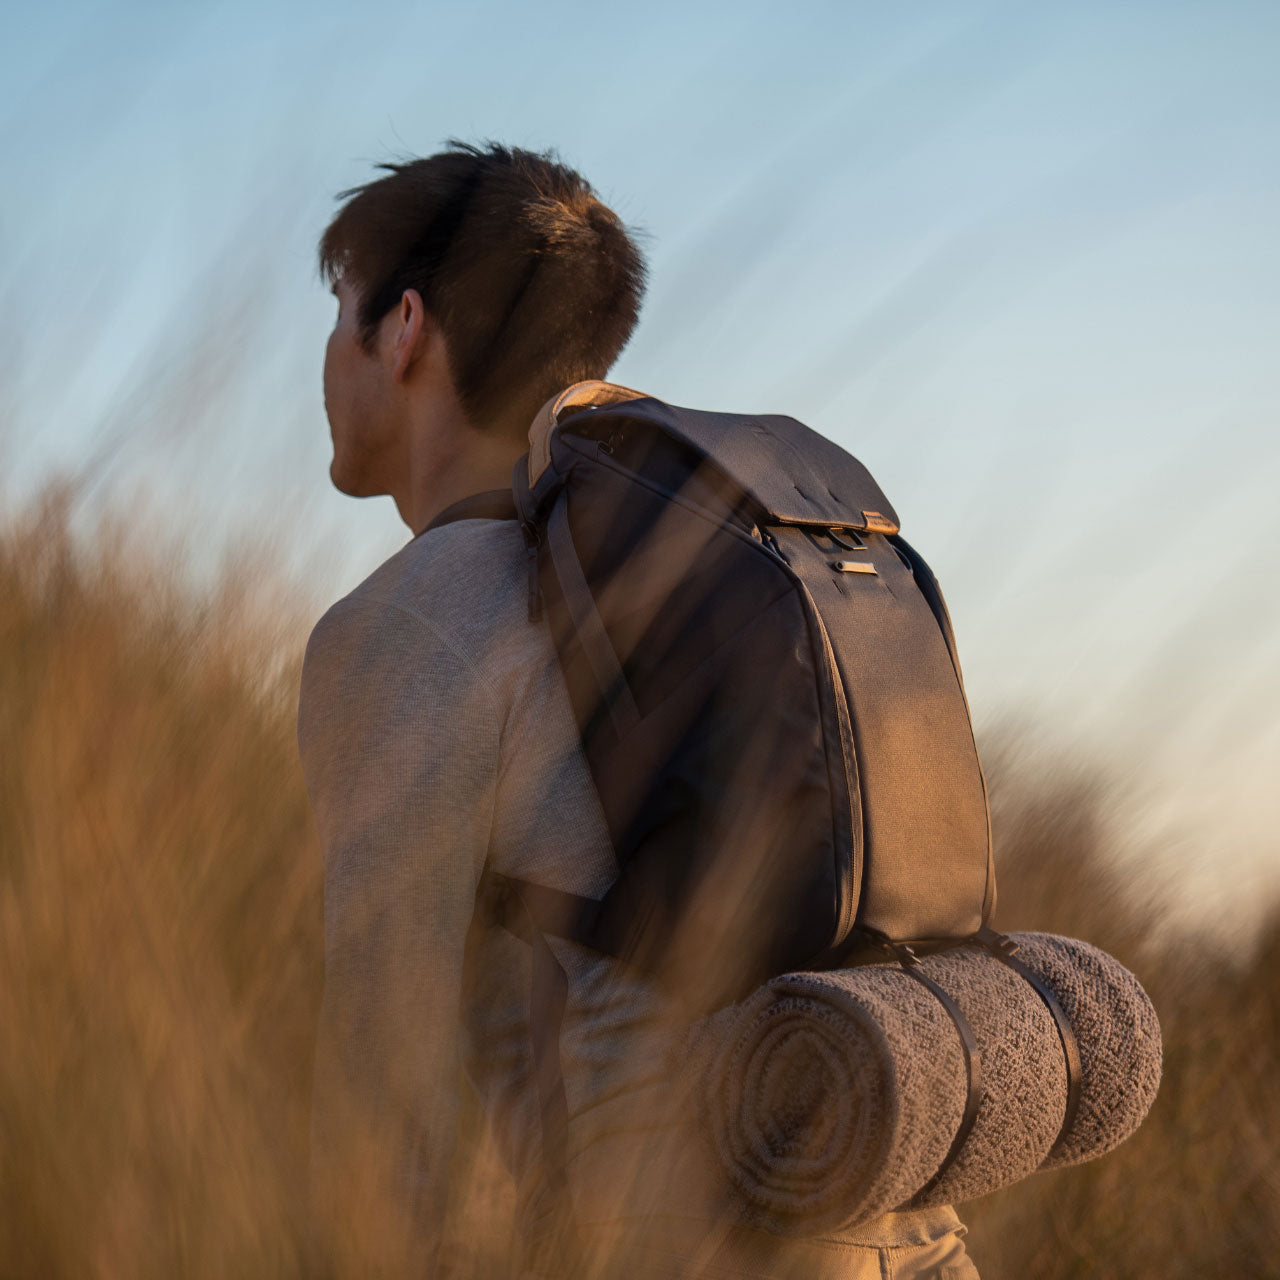 Man with Everyday Packpack in field